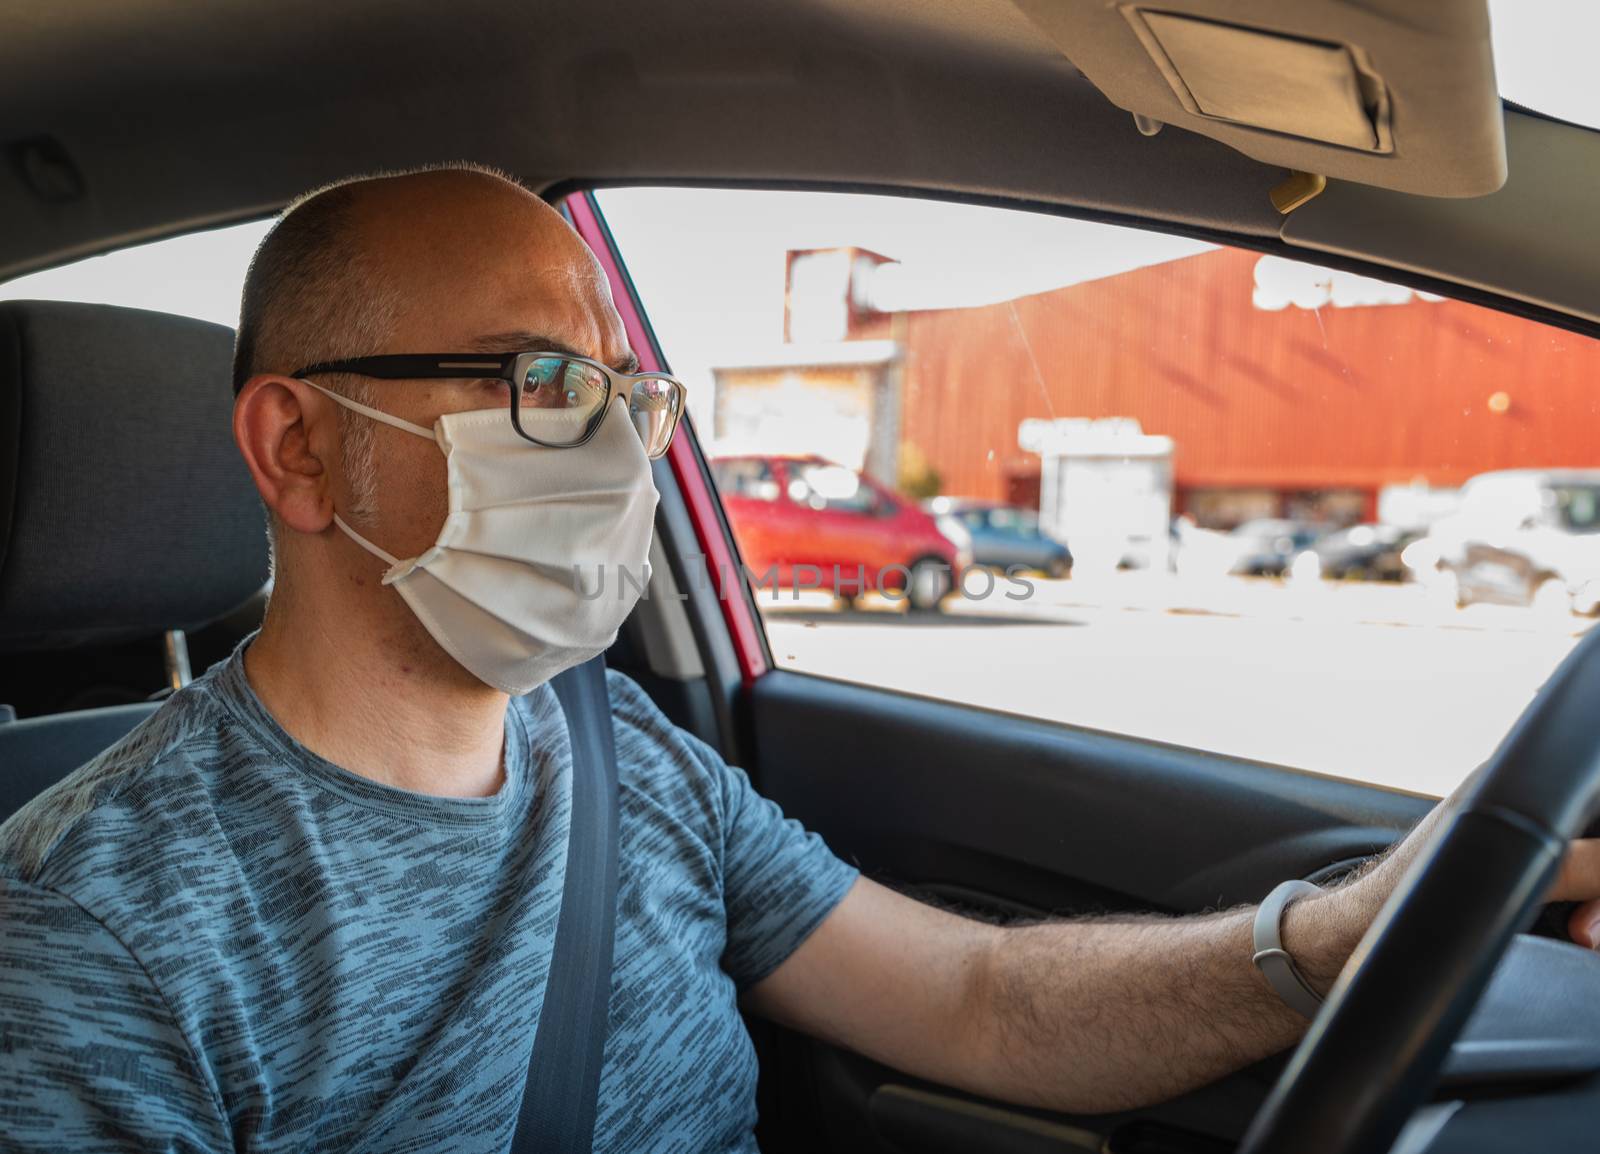 Turin, Piedmont, Italy. Maggio2020. Coronavirus pandemic: portrait of a Caucasian man driving a car wearing a white mask to avoid contagion. Selective focus on man and blurred background. Sunny day.